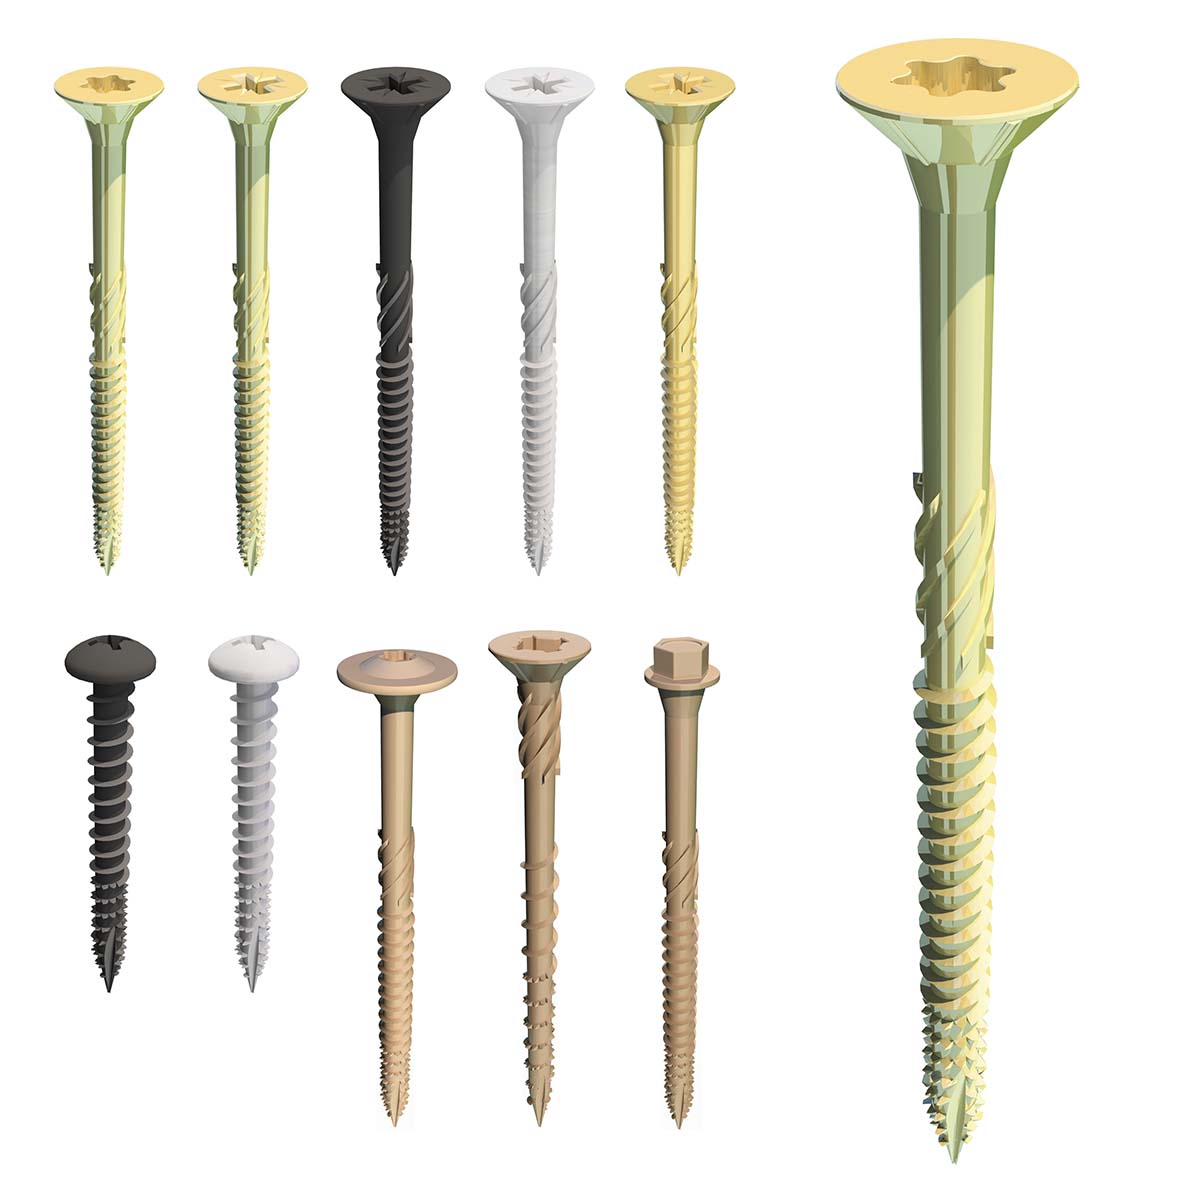 Realistic illustrations of screws. illustration of screws in a realistic style